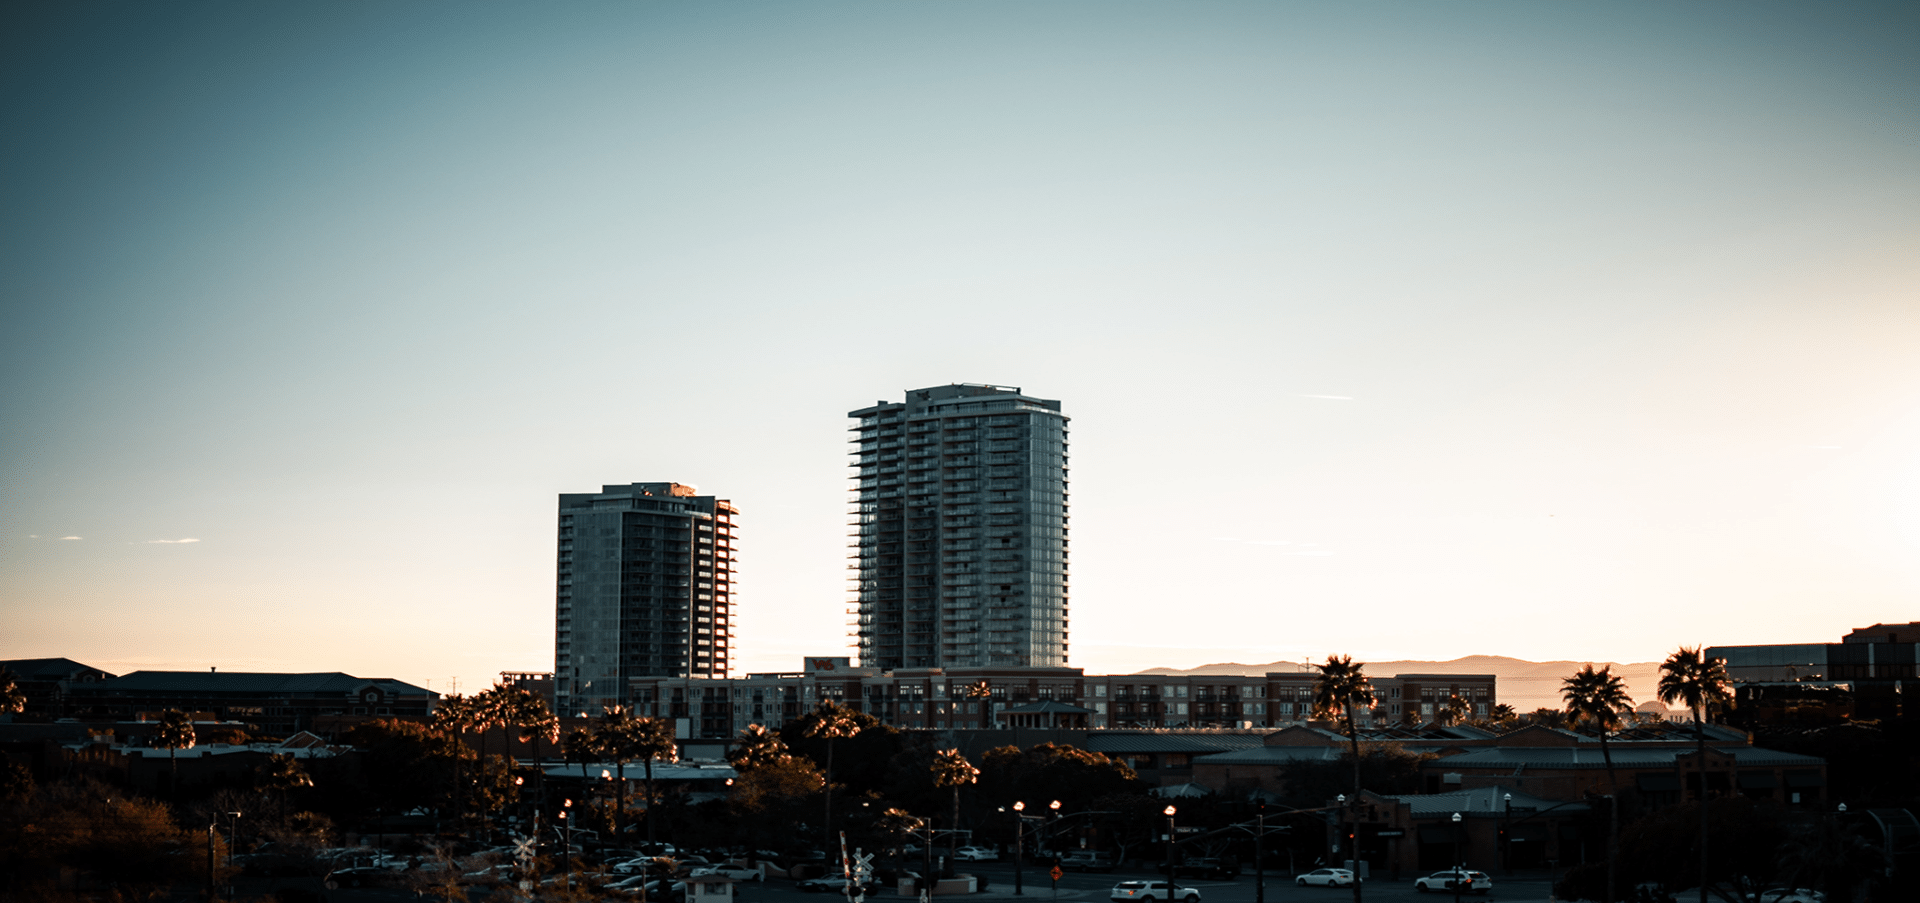 Sustainable-cities-Buildings-at-dusk-Phoenix- Photo by Colin Lloyd on Unsplash